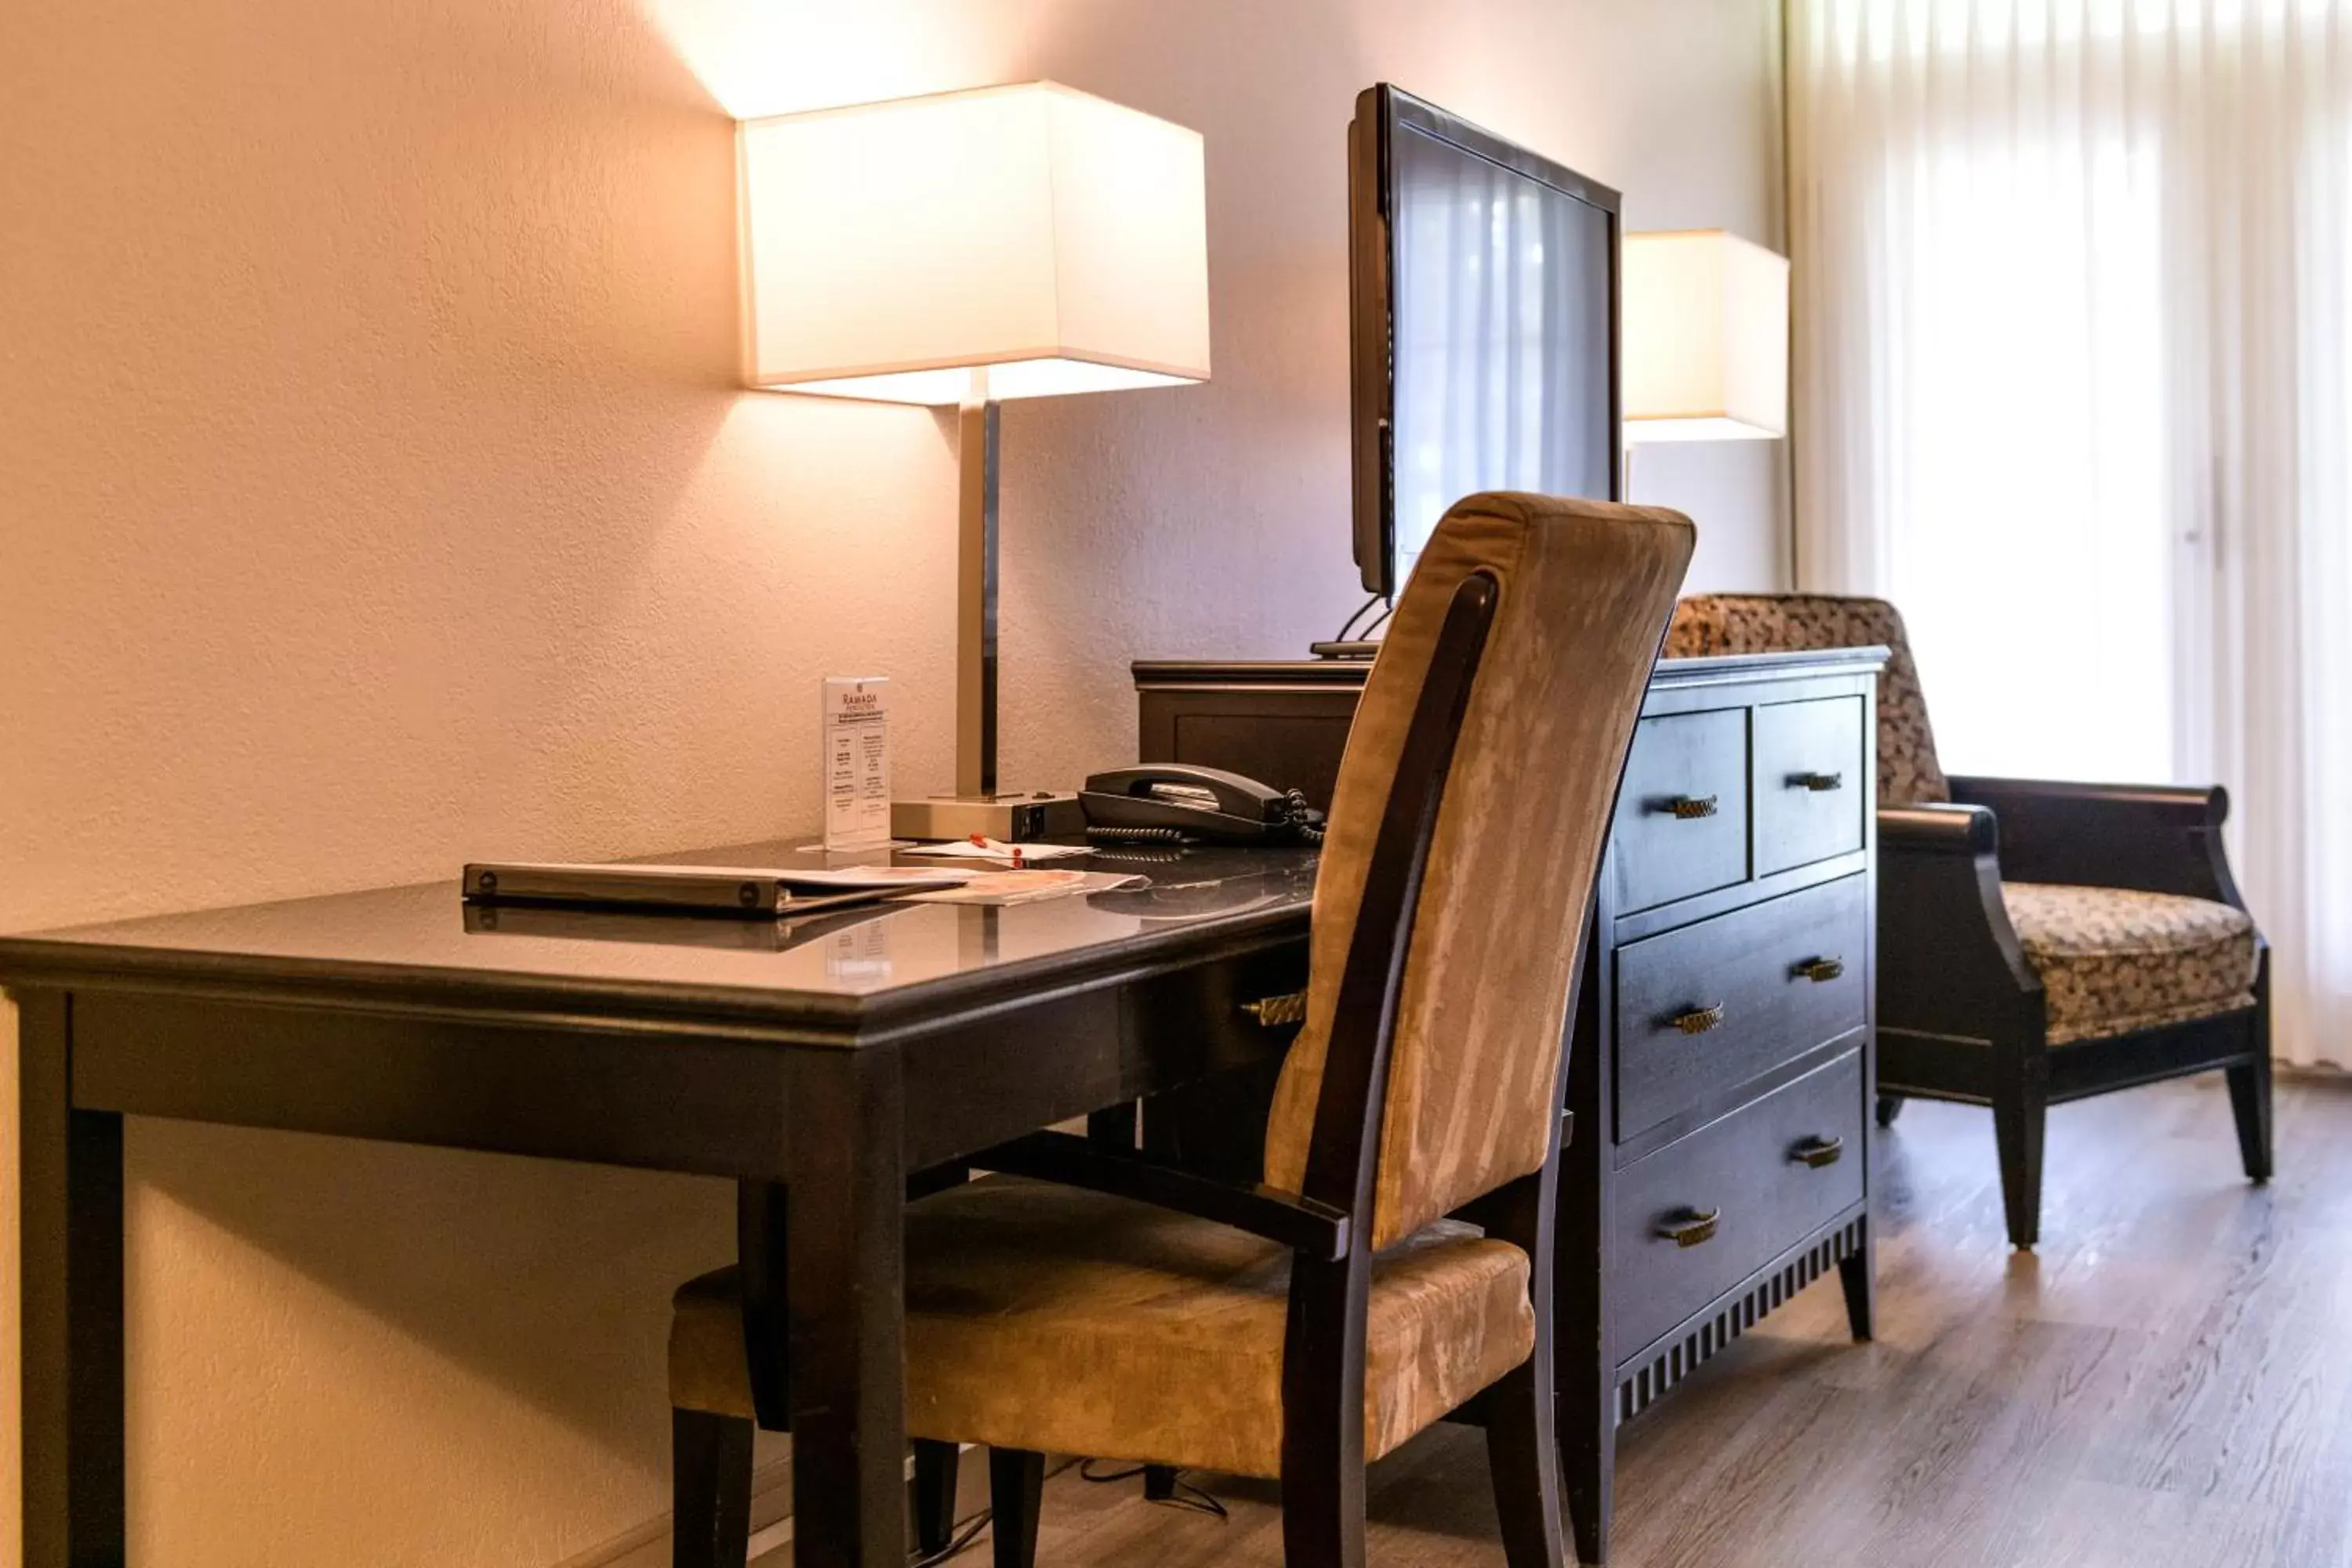 Area and facilities in Ramada by Wyndham Penticton Hotel & Suites